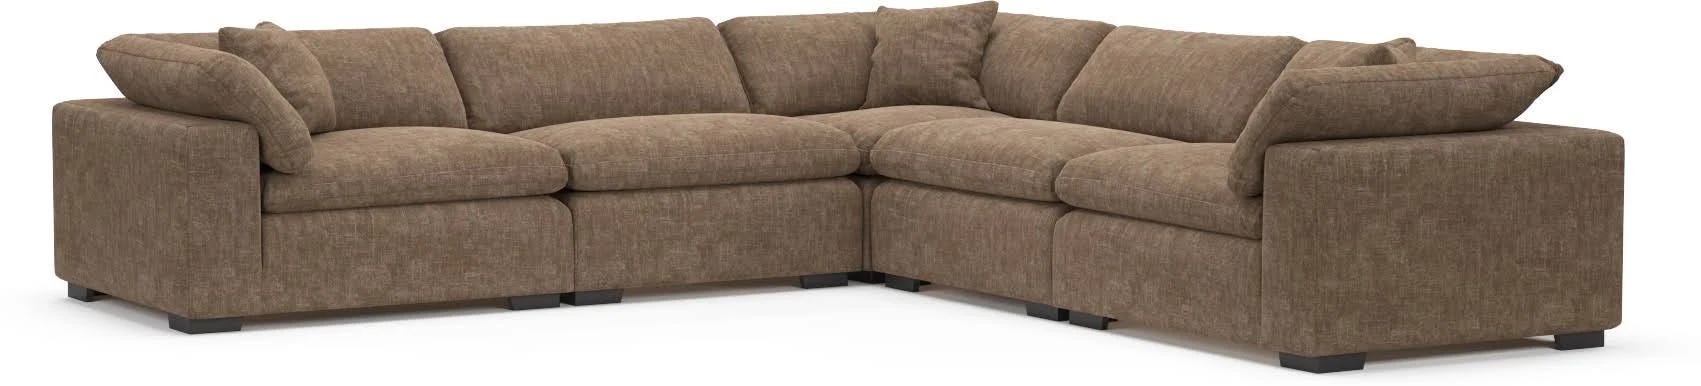 Argo Java Brown 5-Piece Microfiber Sectional for Eco Performance | Image